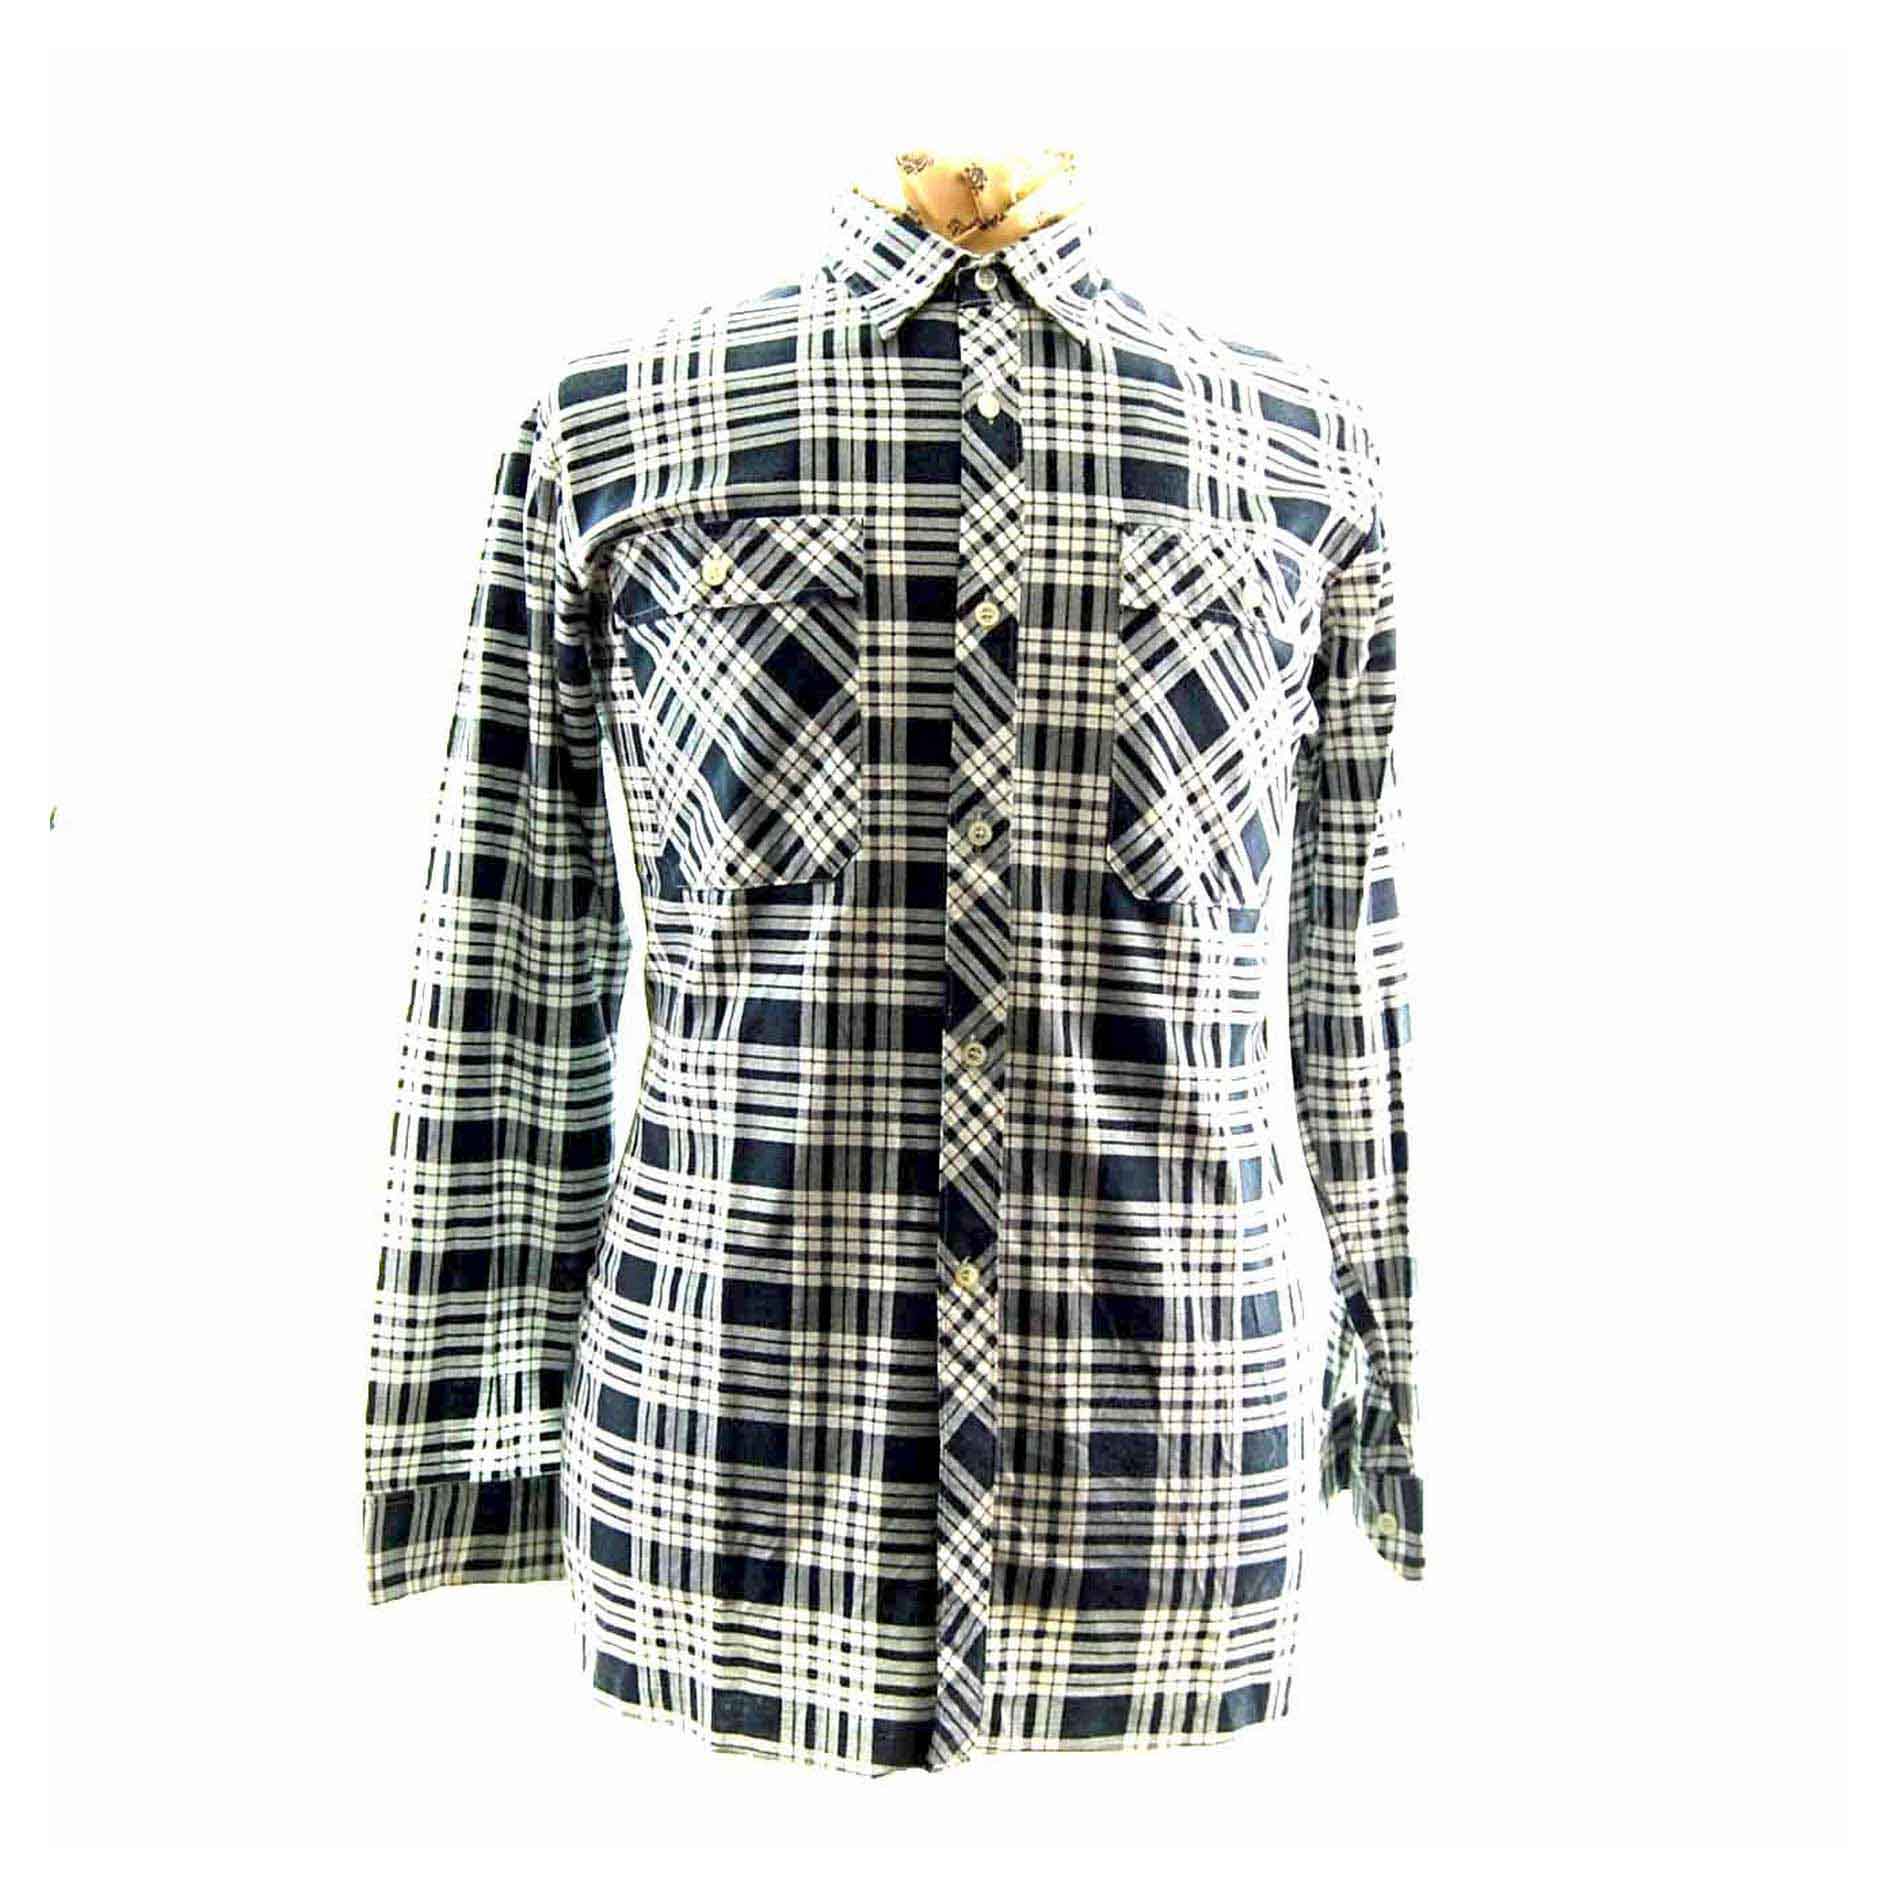 90s Mens White Blue Checked Flannel Shirt - M - Blue 17 Vintage Clothing